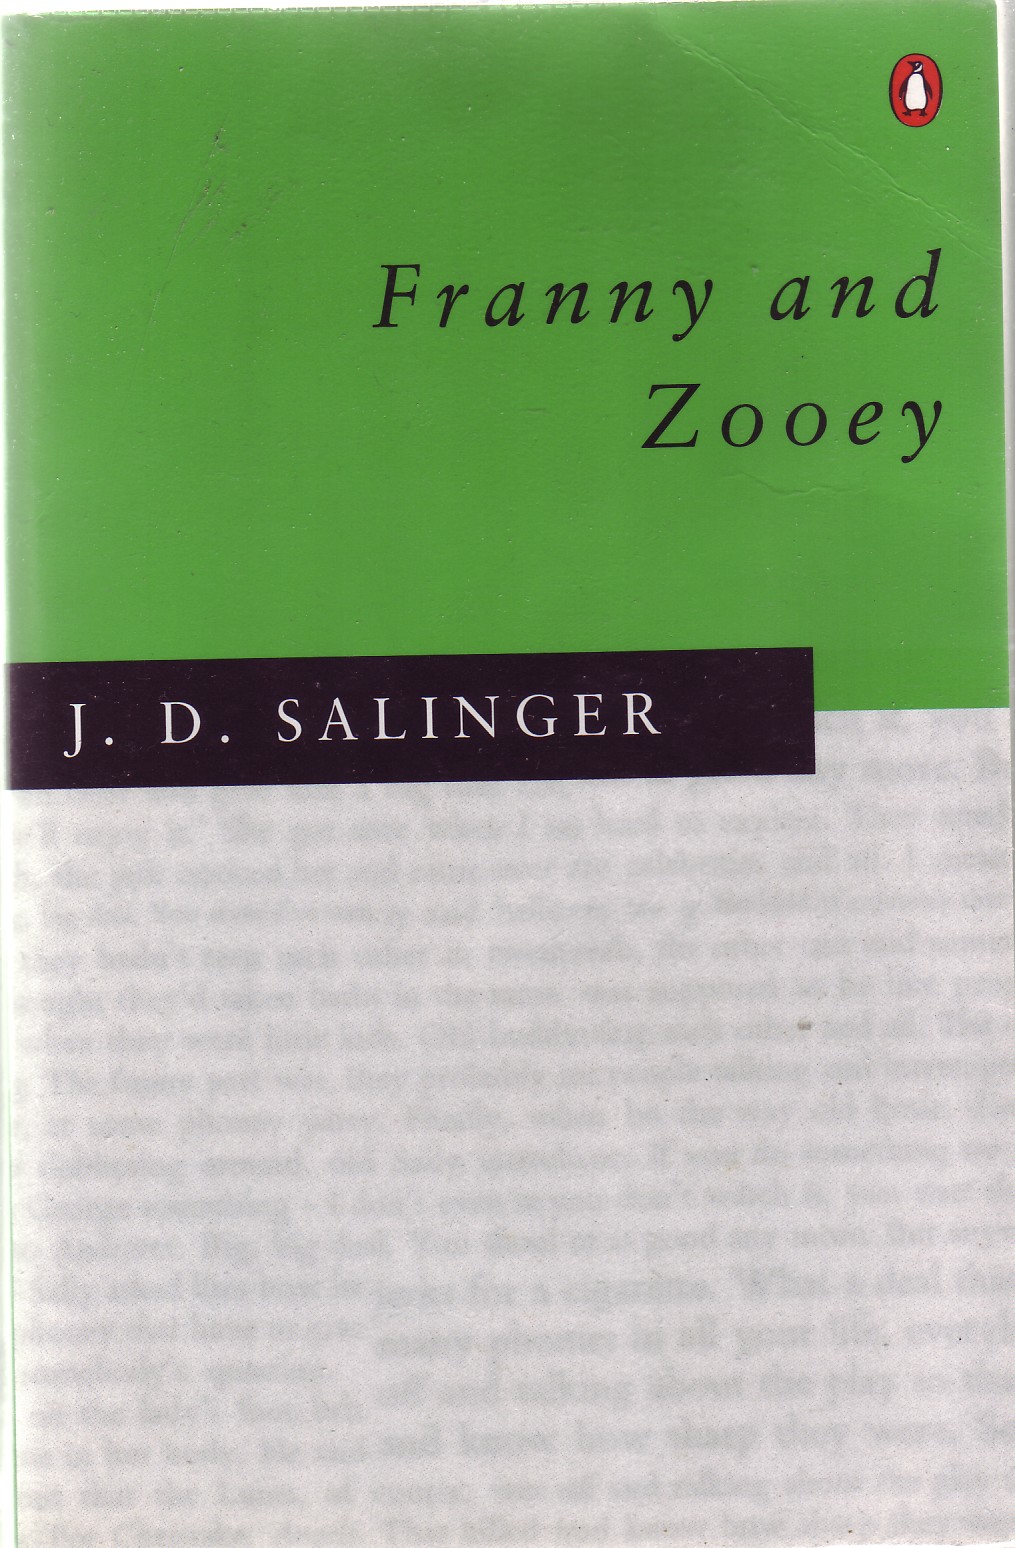 [franny+and+zoory]